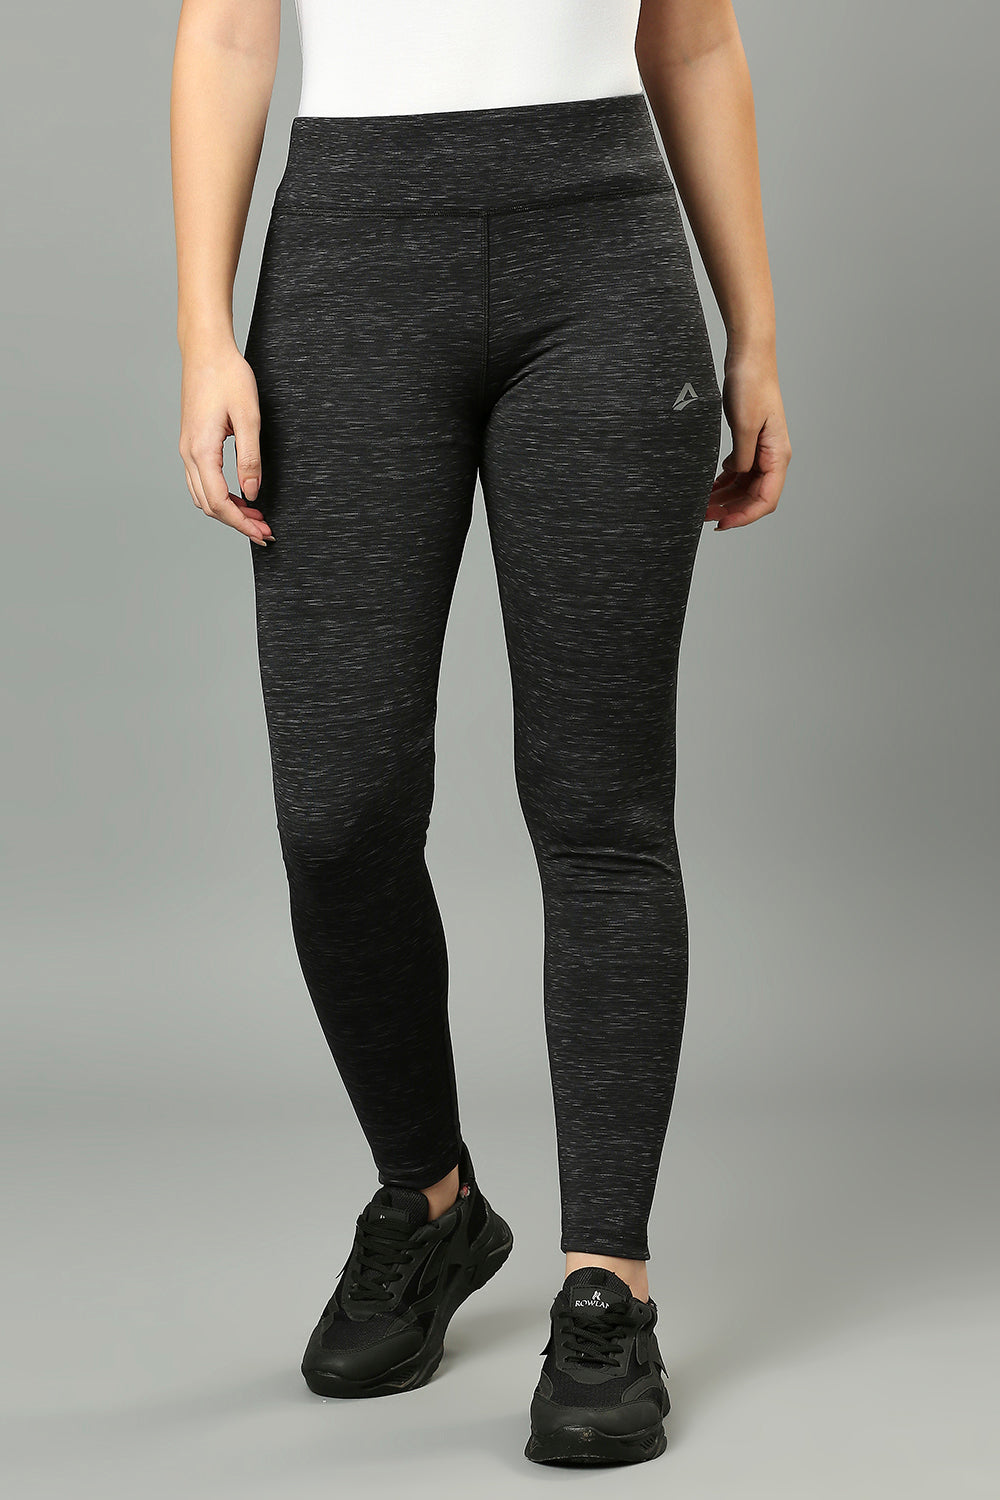 Buy SHAPERX High Waisted Leggings for Women - Soft Athletic Tummy Control  Pants for Running Cycling Yoga Workout Pack of 1 Online In India At  Discounted Prices